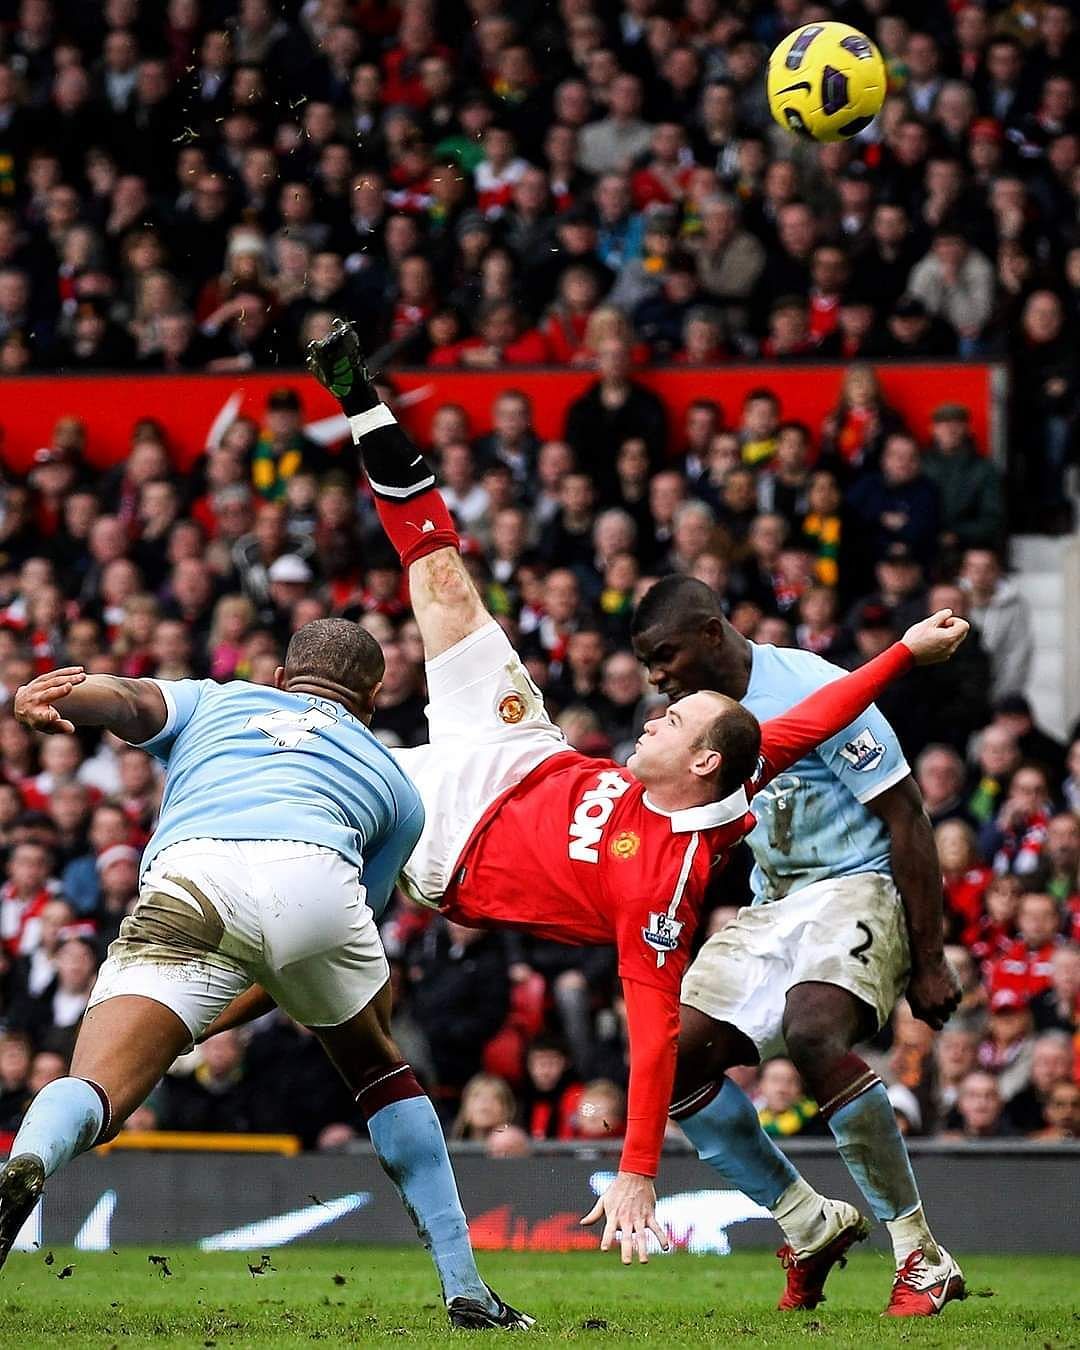 The Manchester Derby has produced some of the most iconic moments in recent Premier League seasons.